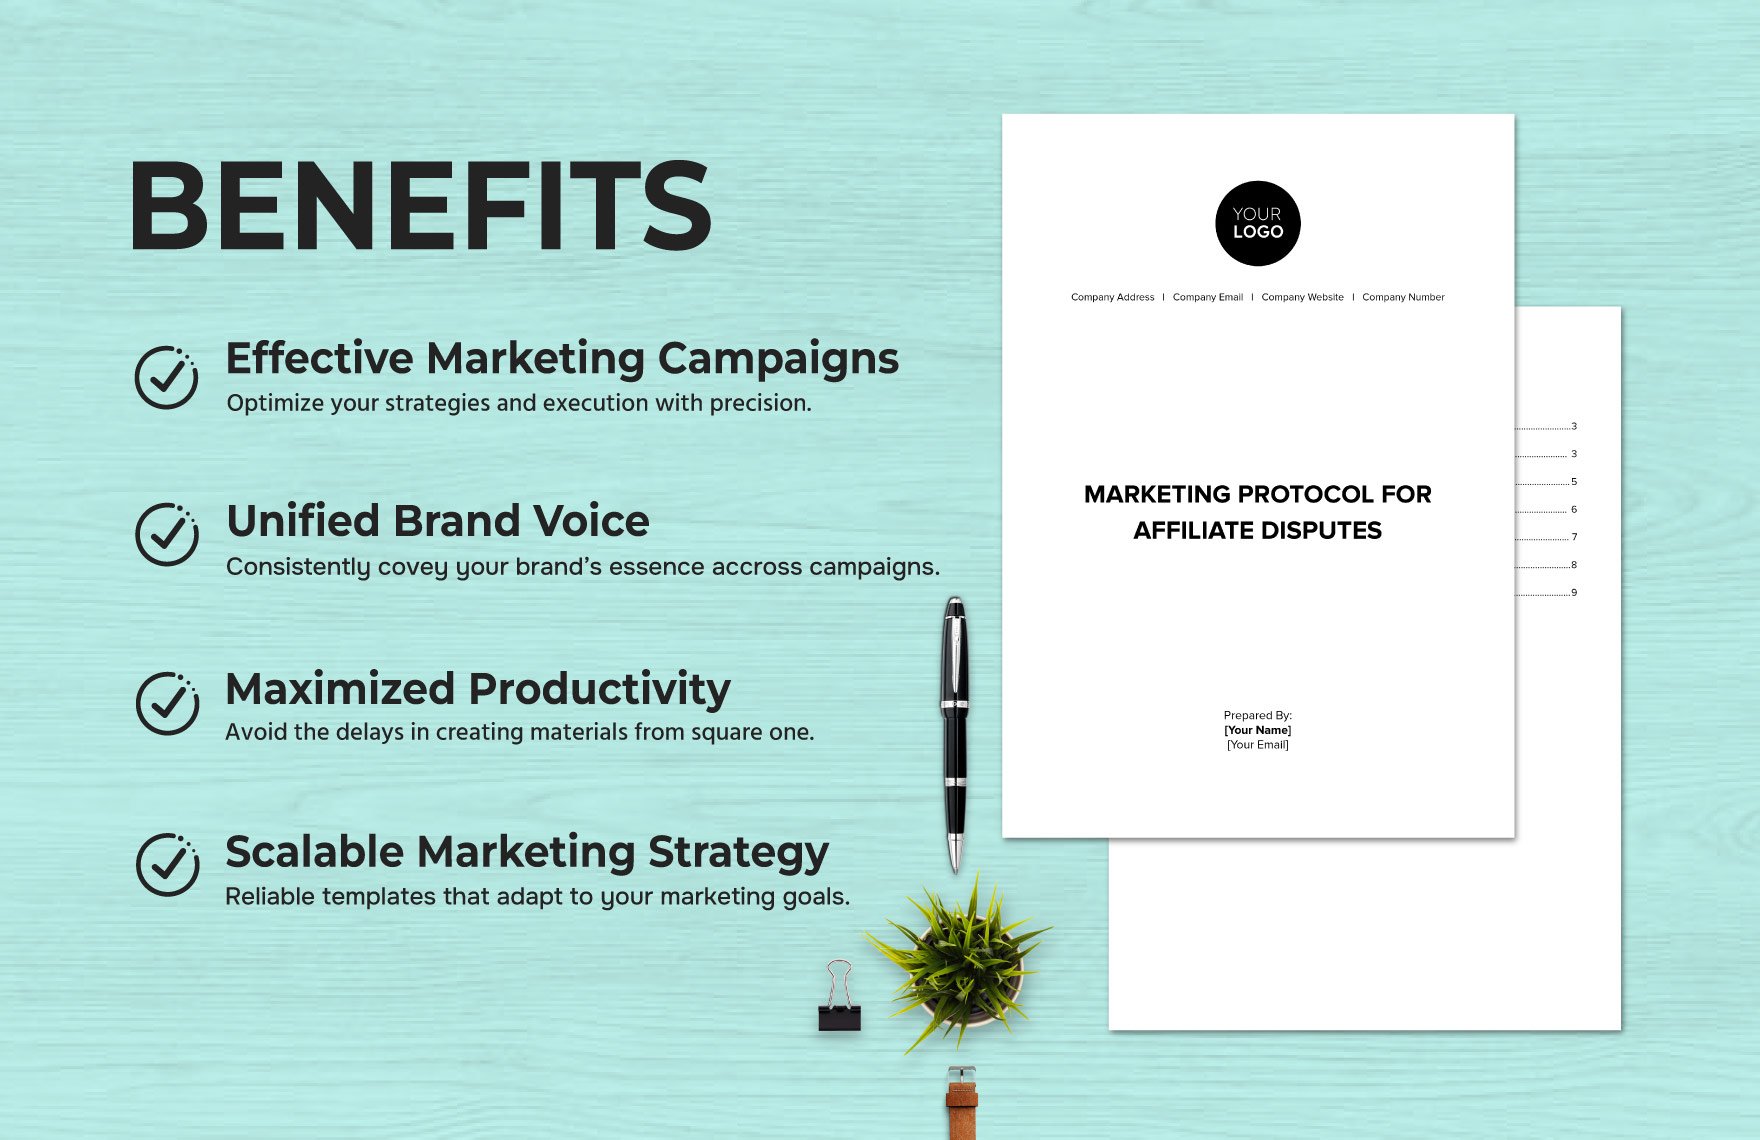 Marketing Protocol for Affiliate Disputes Template